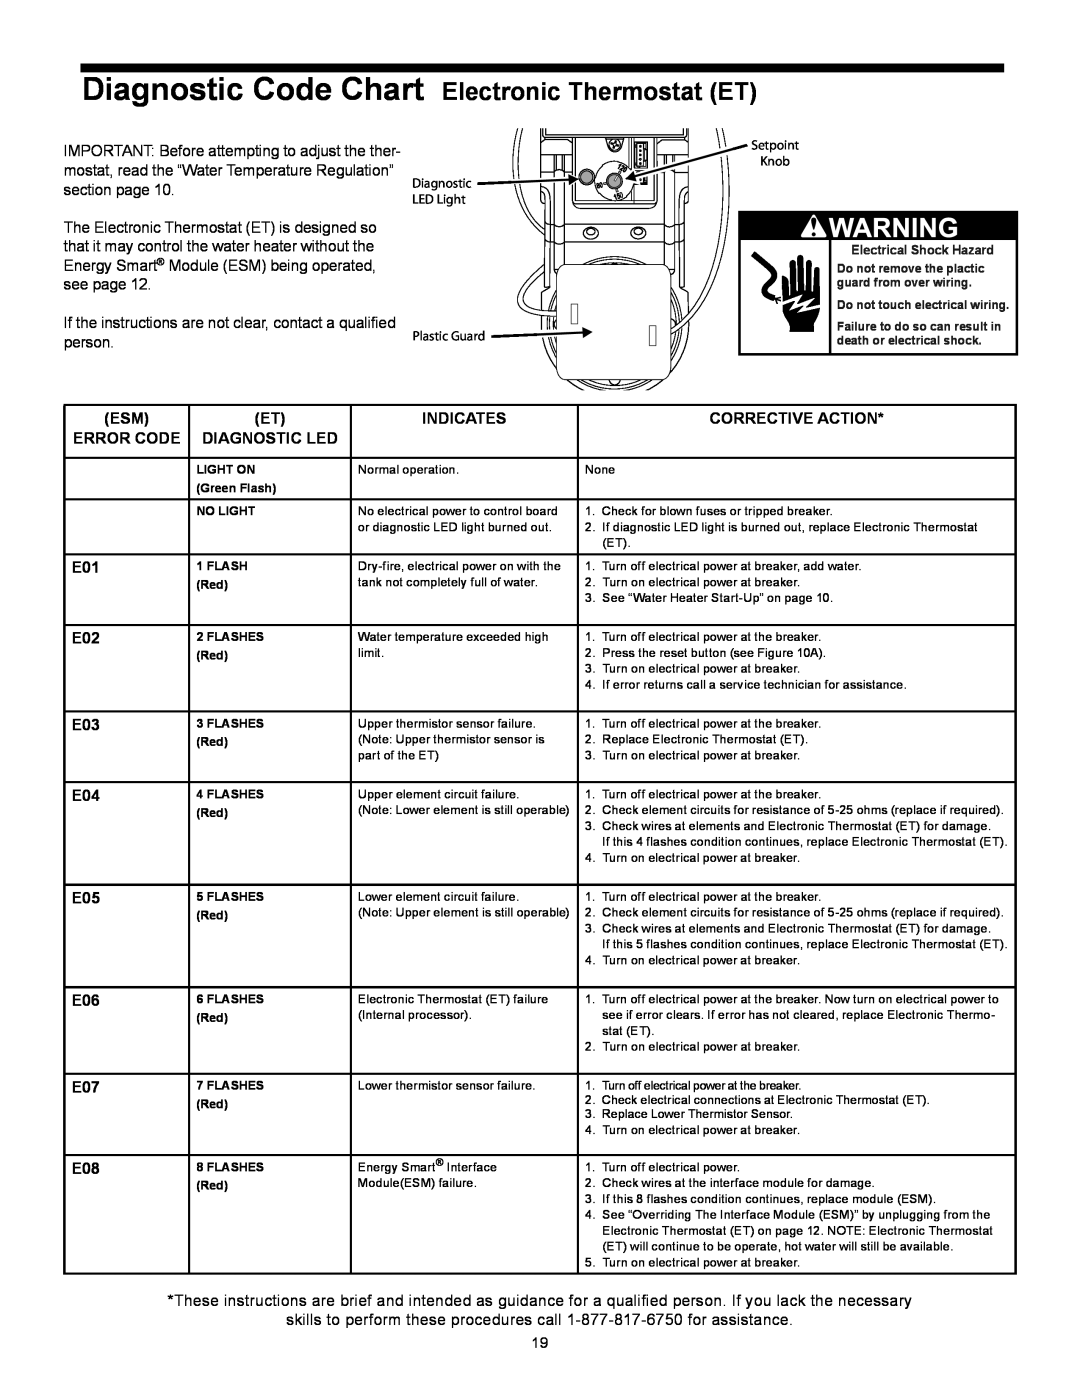 Whirlpool 318686-000 Diagnostic Code Chart Electronic Thermostat ET, person, Indicates, Corrective Action, Error Code 